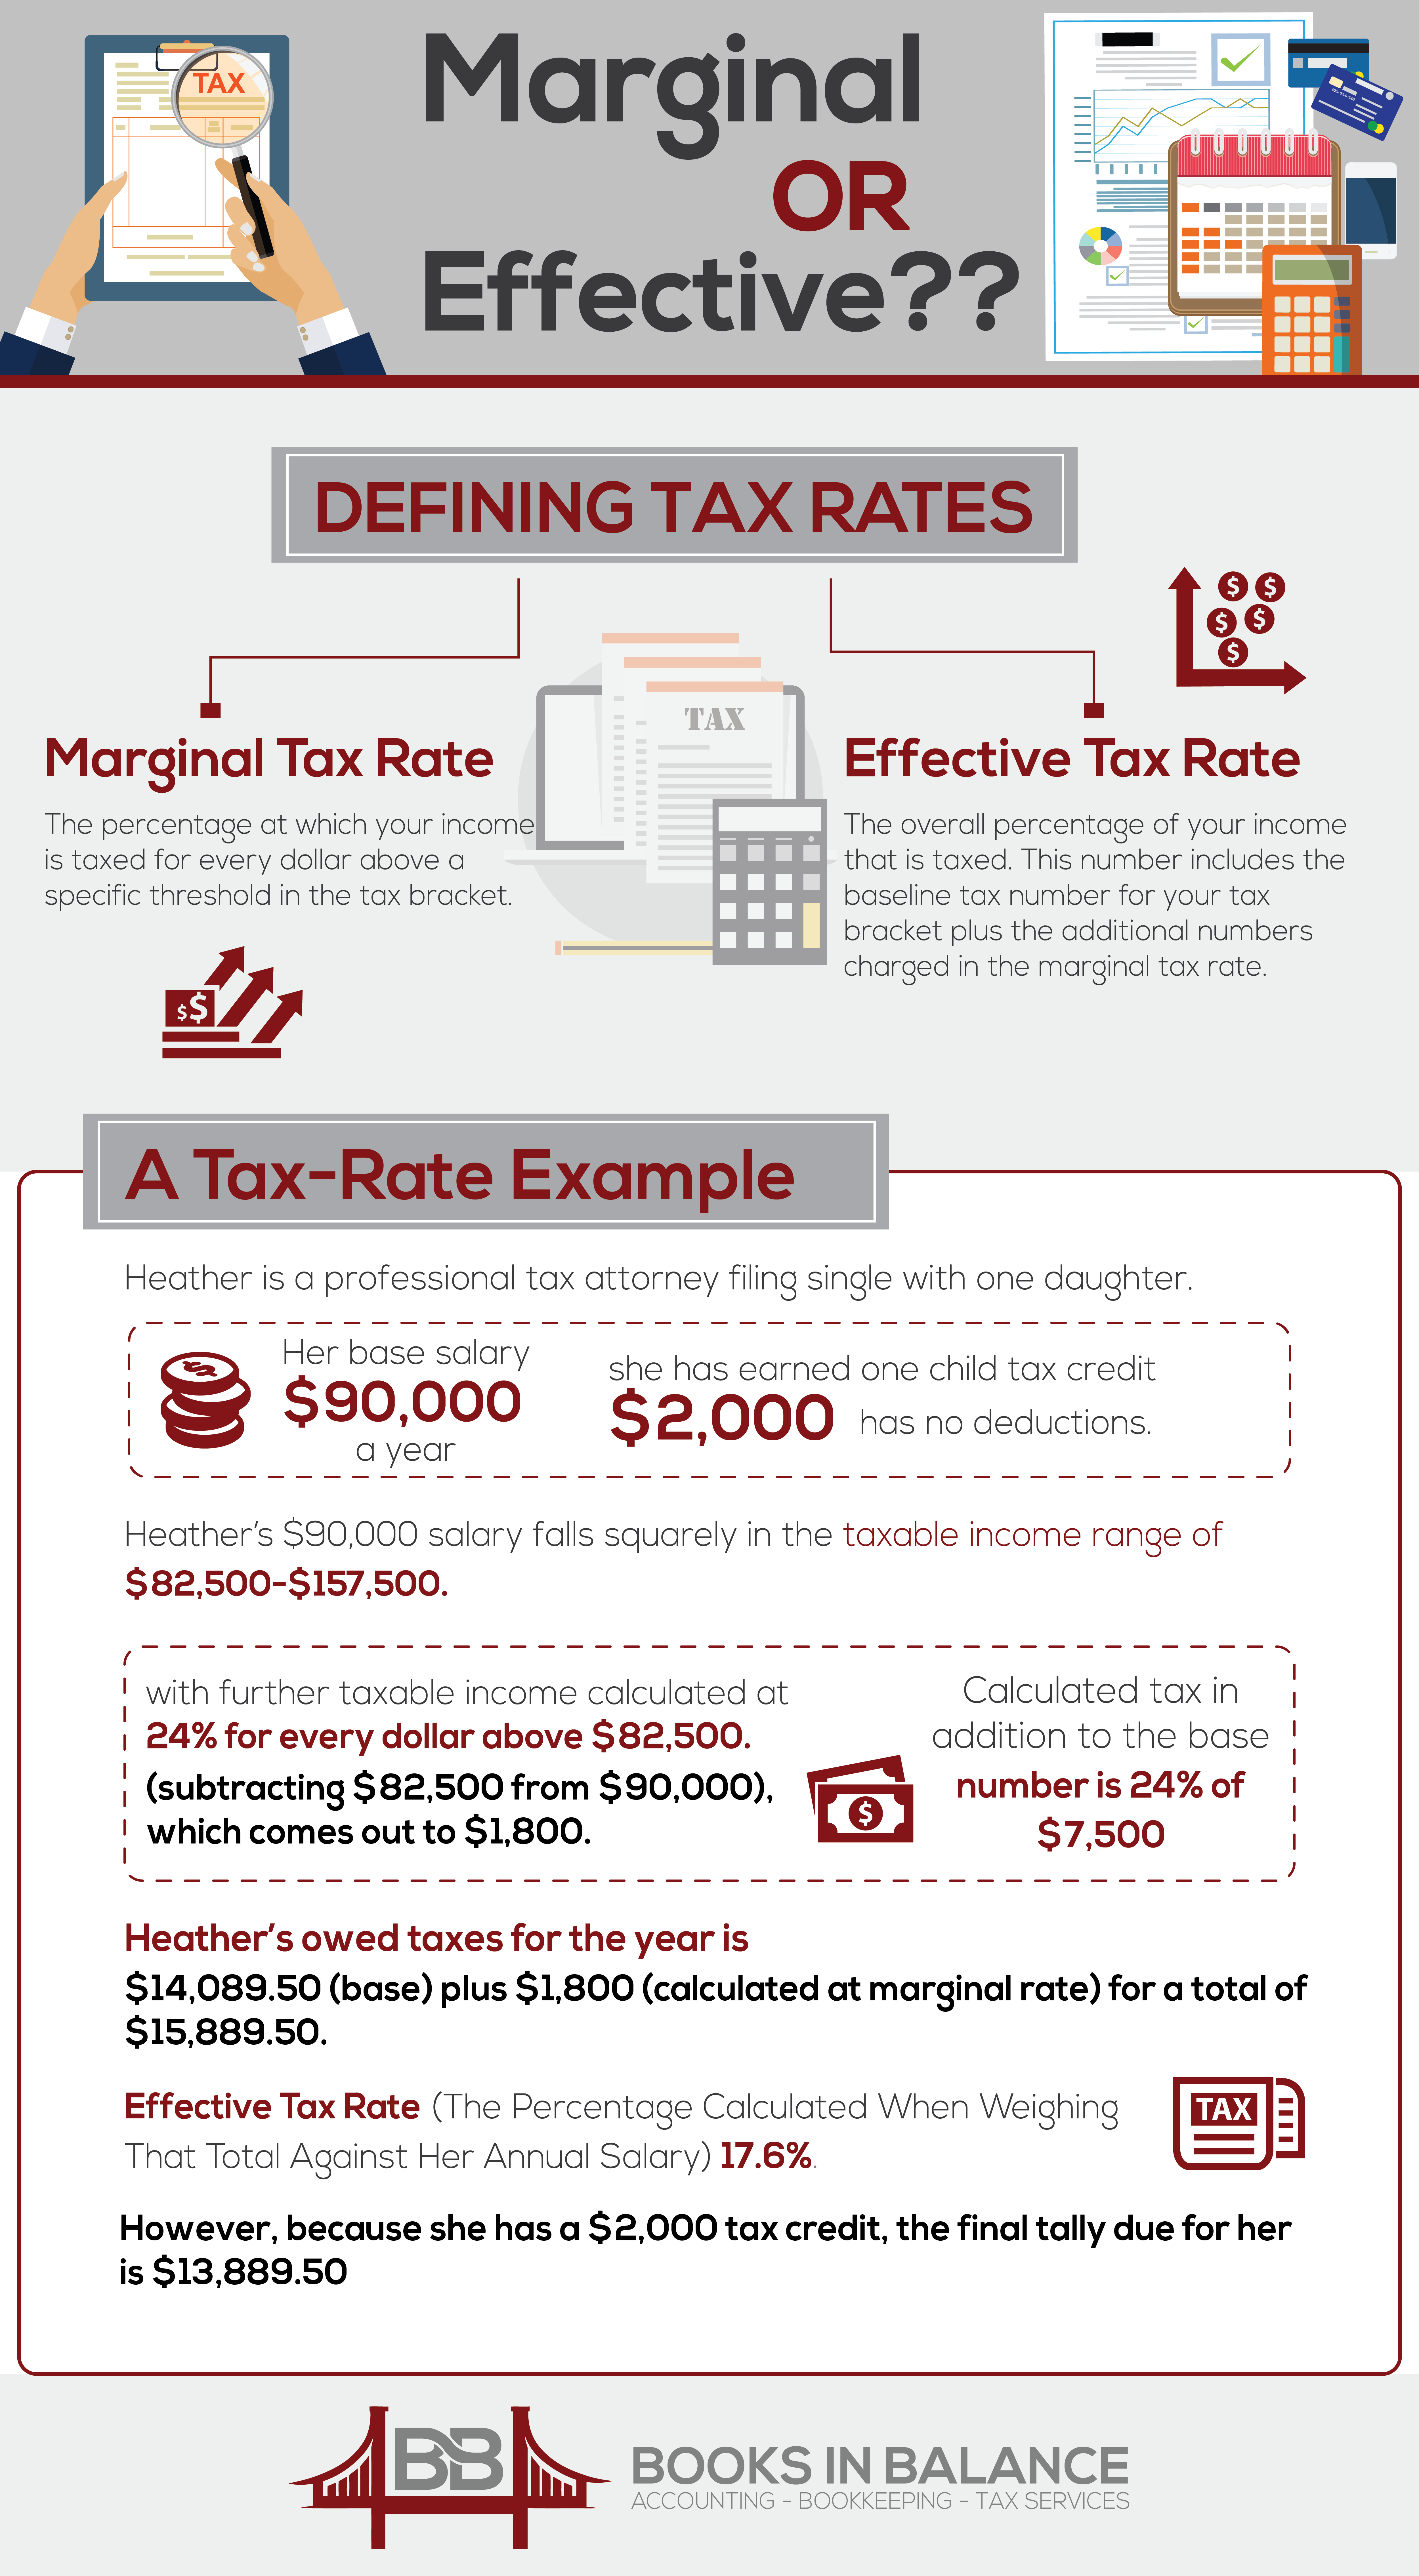 marginal-effective-tax-difference-infographic